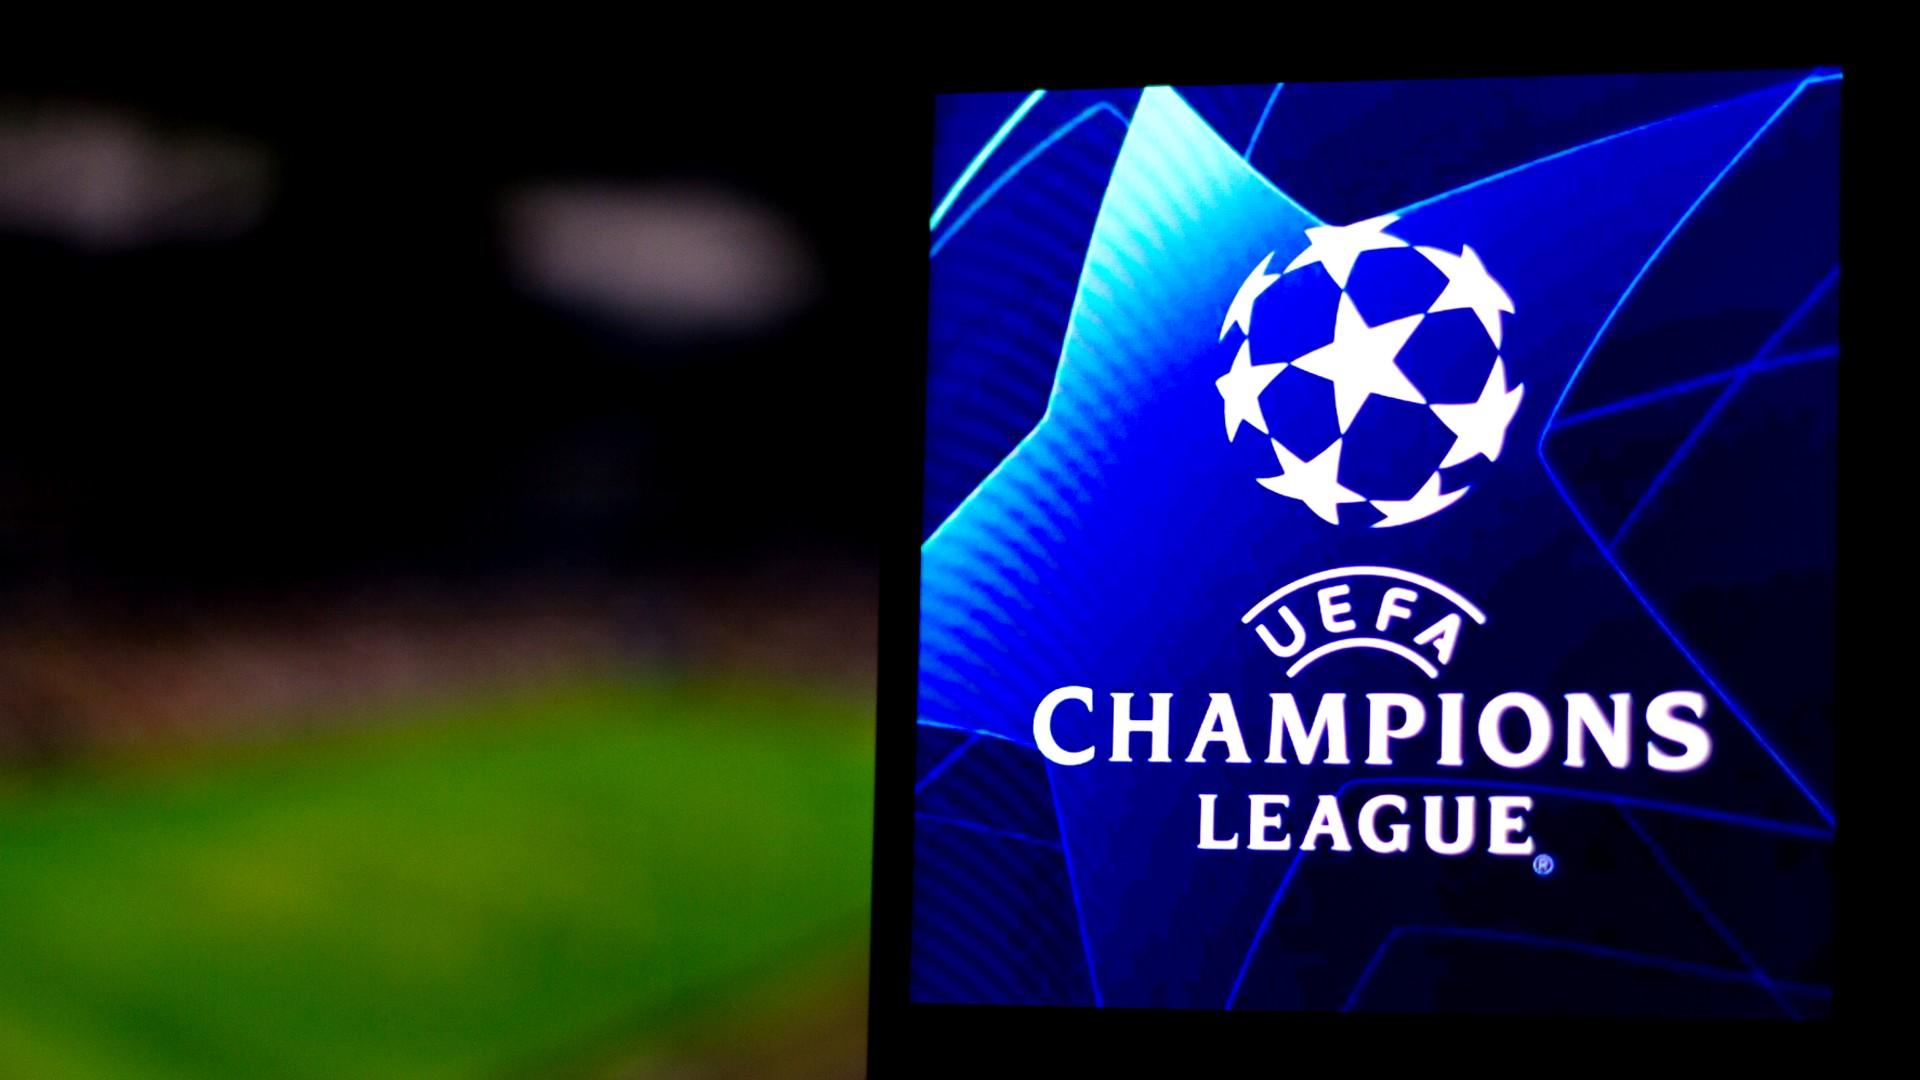 How to watch Champions League: TV channels, free live streams for all matches in 2022/23